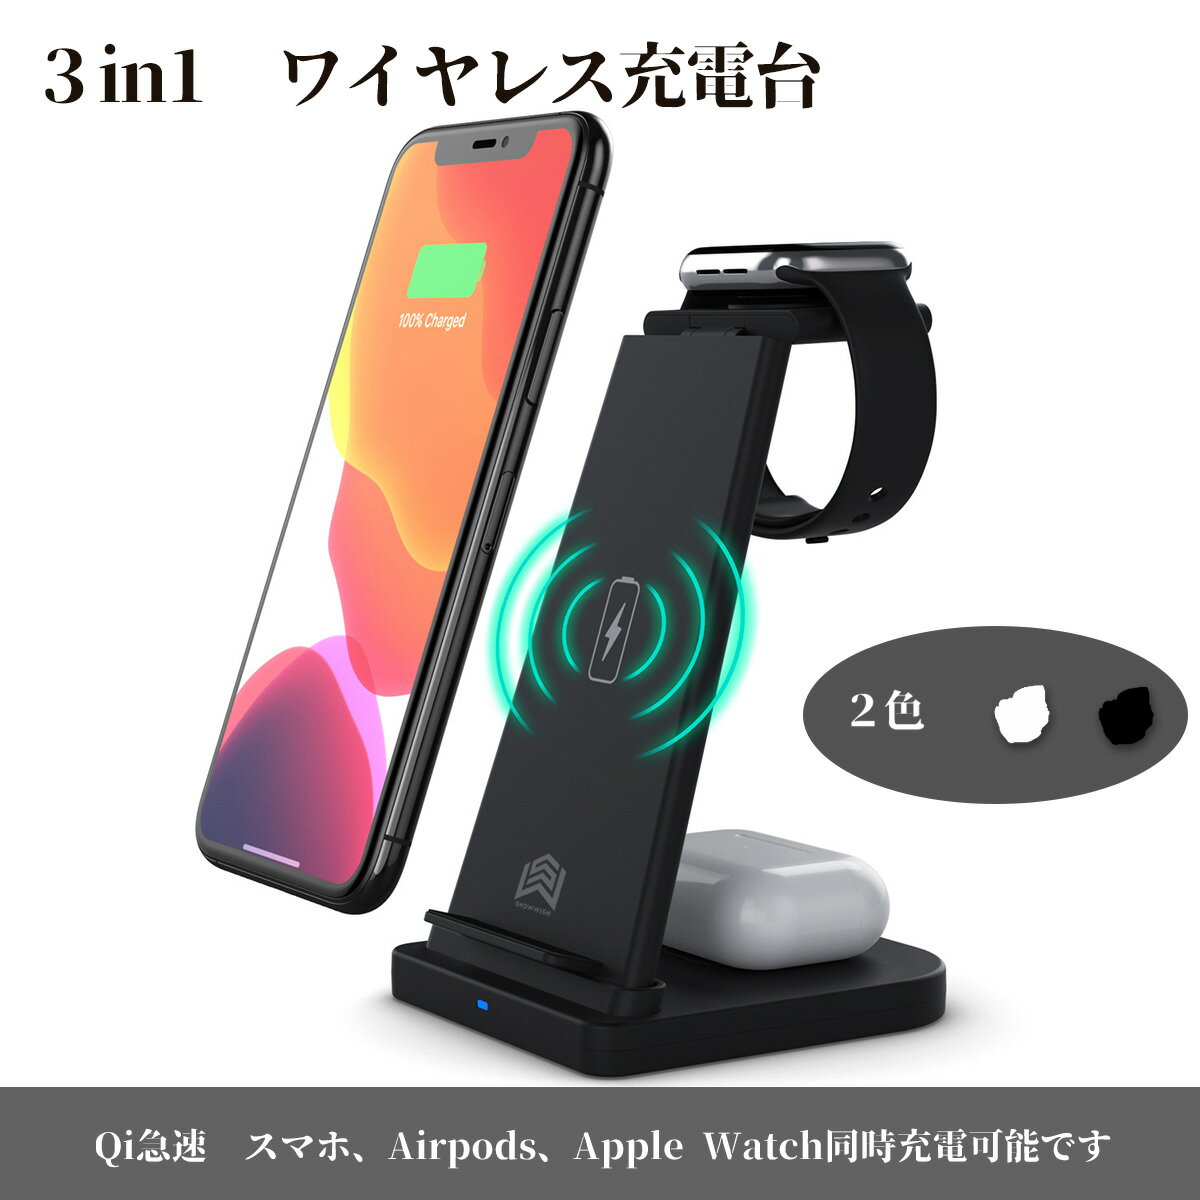 Qi 急速 ワイヤレス充電器 4in1 充電スタンド Apple Watch Airpods iPhone ワイヤレス充電器 充電スタンド 充電ドック ワイヤレスチャージ スマホスタンド 充電ステーション 4ポート搭載 iPhone Micro Type-C 急速 Samsung Huawei Sony iPhone11 Android